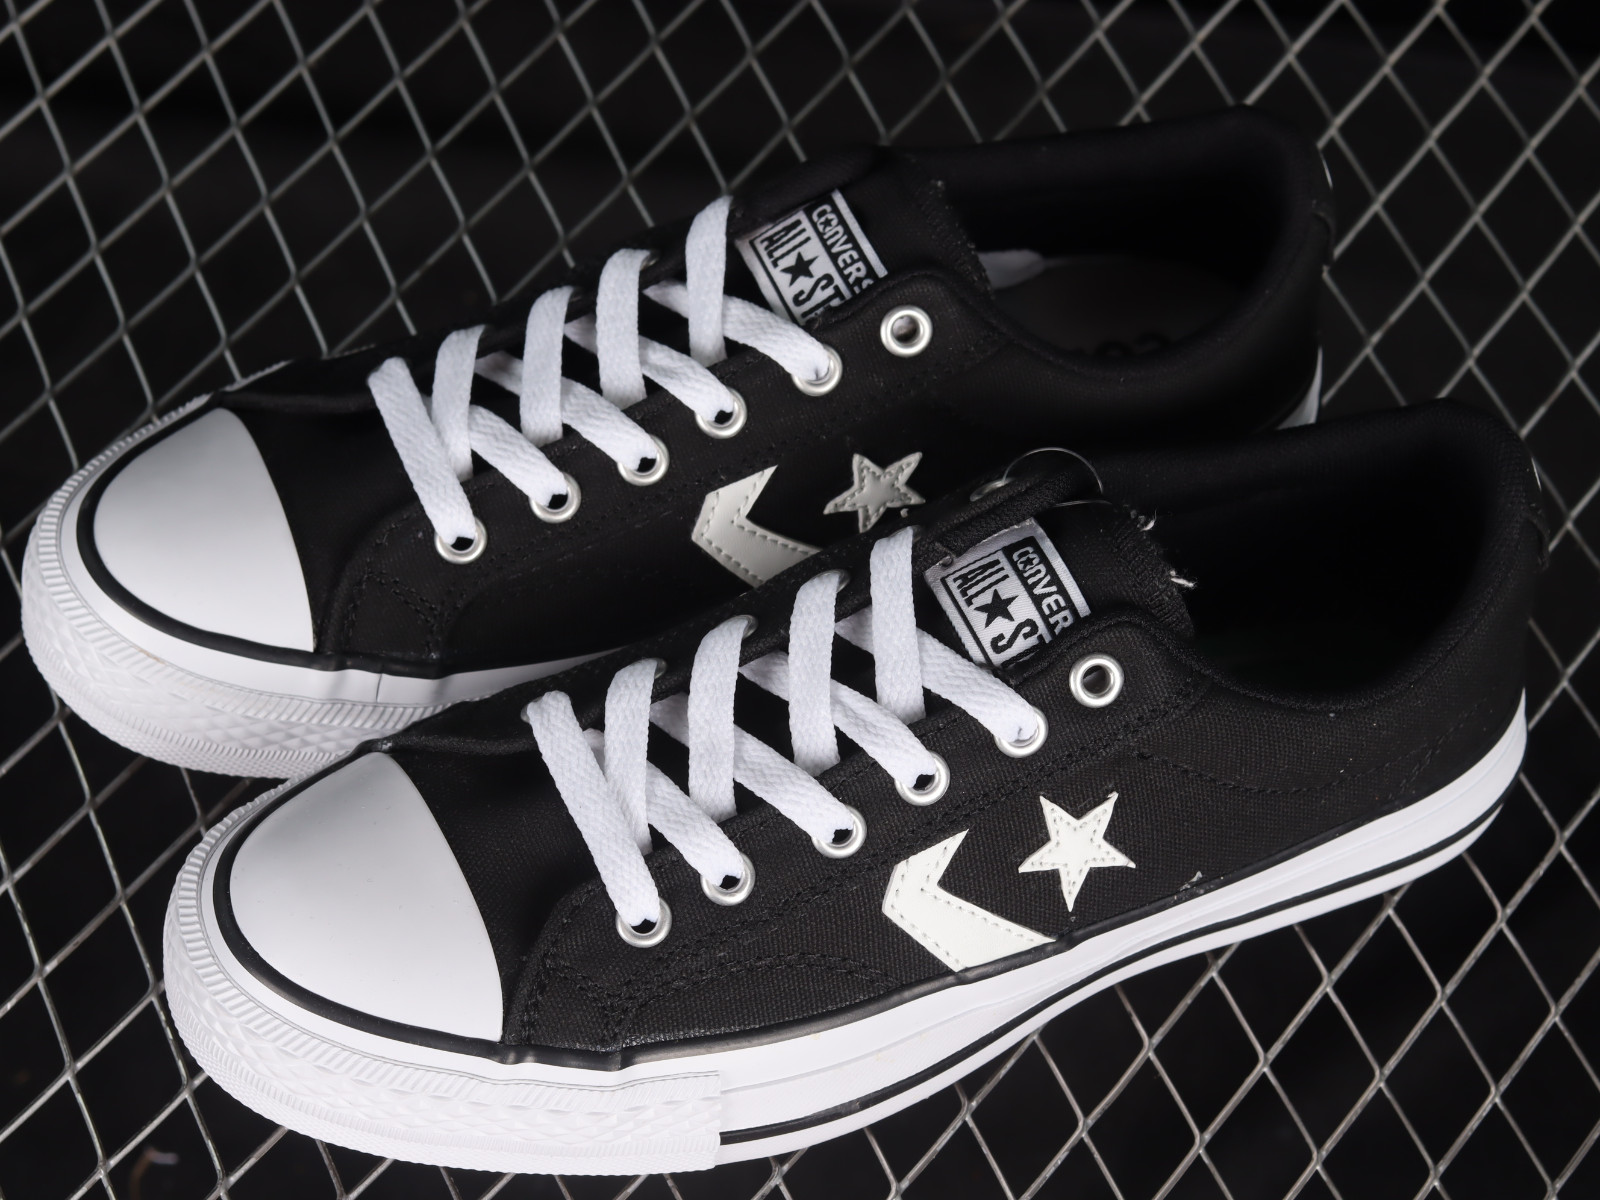 Converse Chuck Taylor All Star Ox Low Black White 161595C - GmarShops